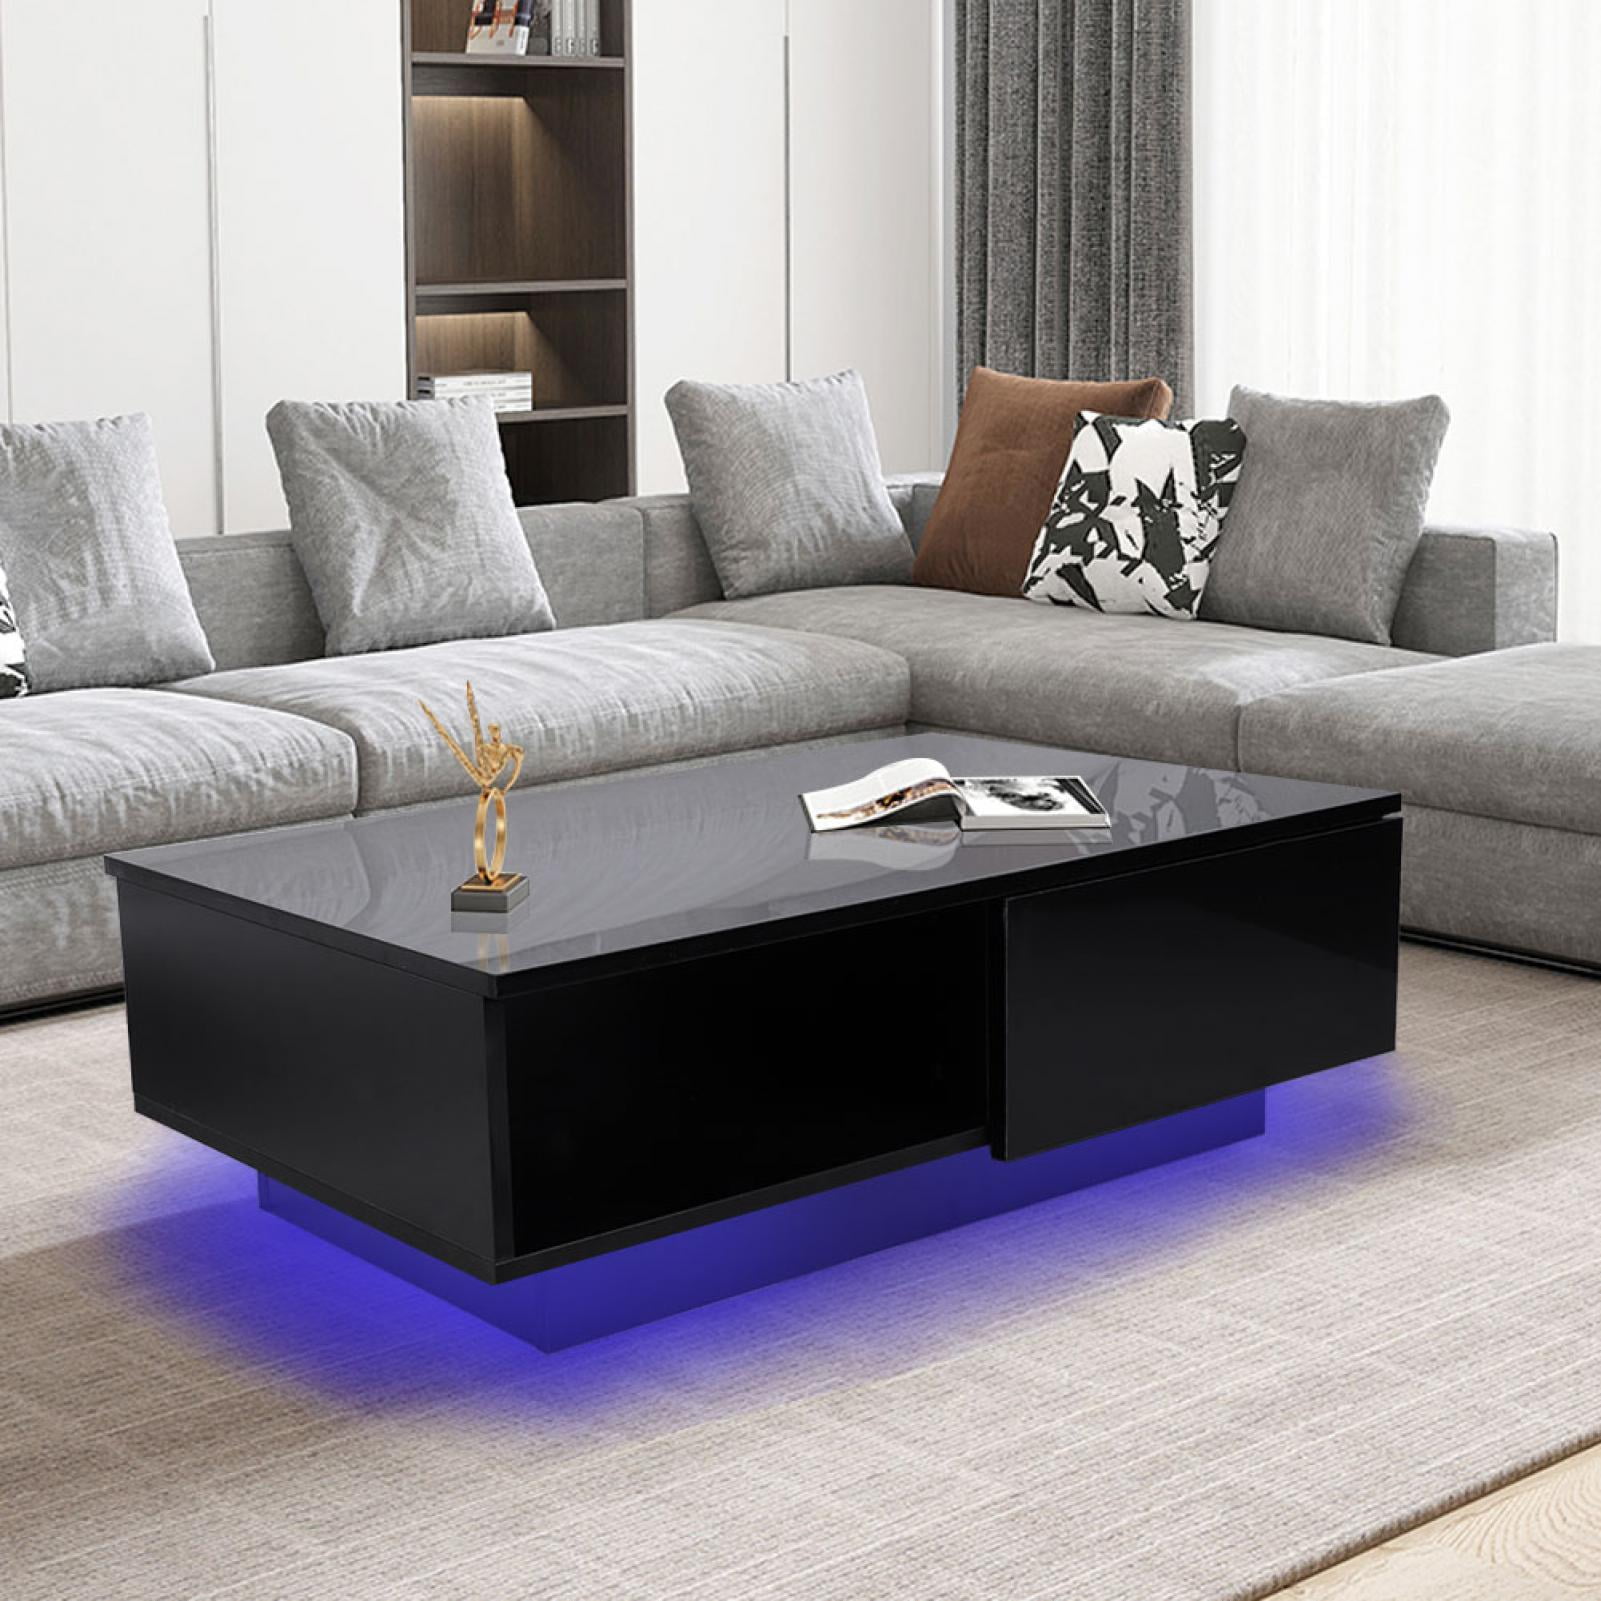 Details about   Coffee Table LED High Gloss Black 41" Accent Tea Side Living Room Furniture 